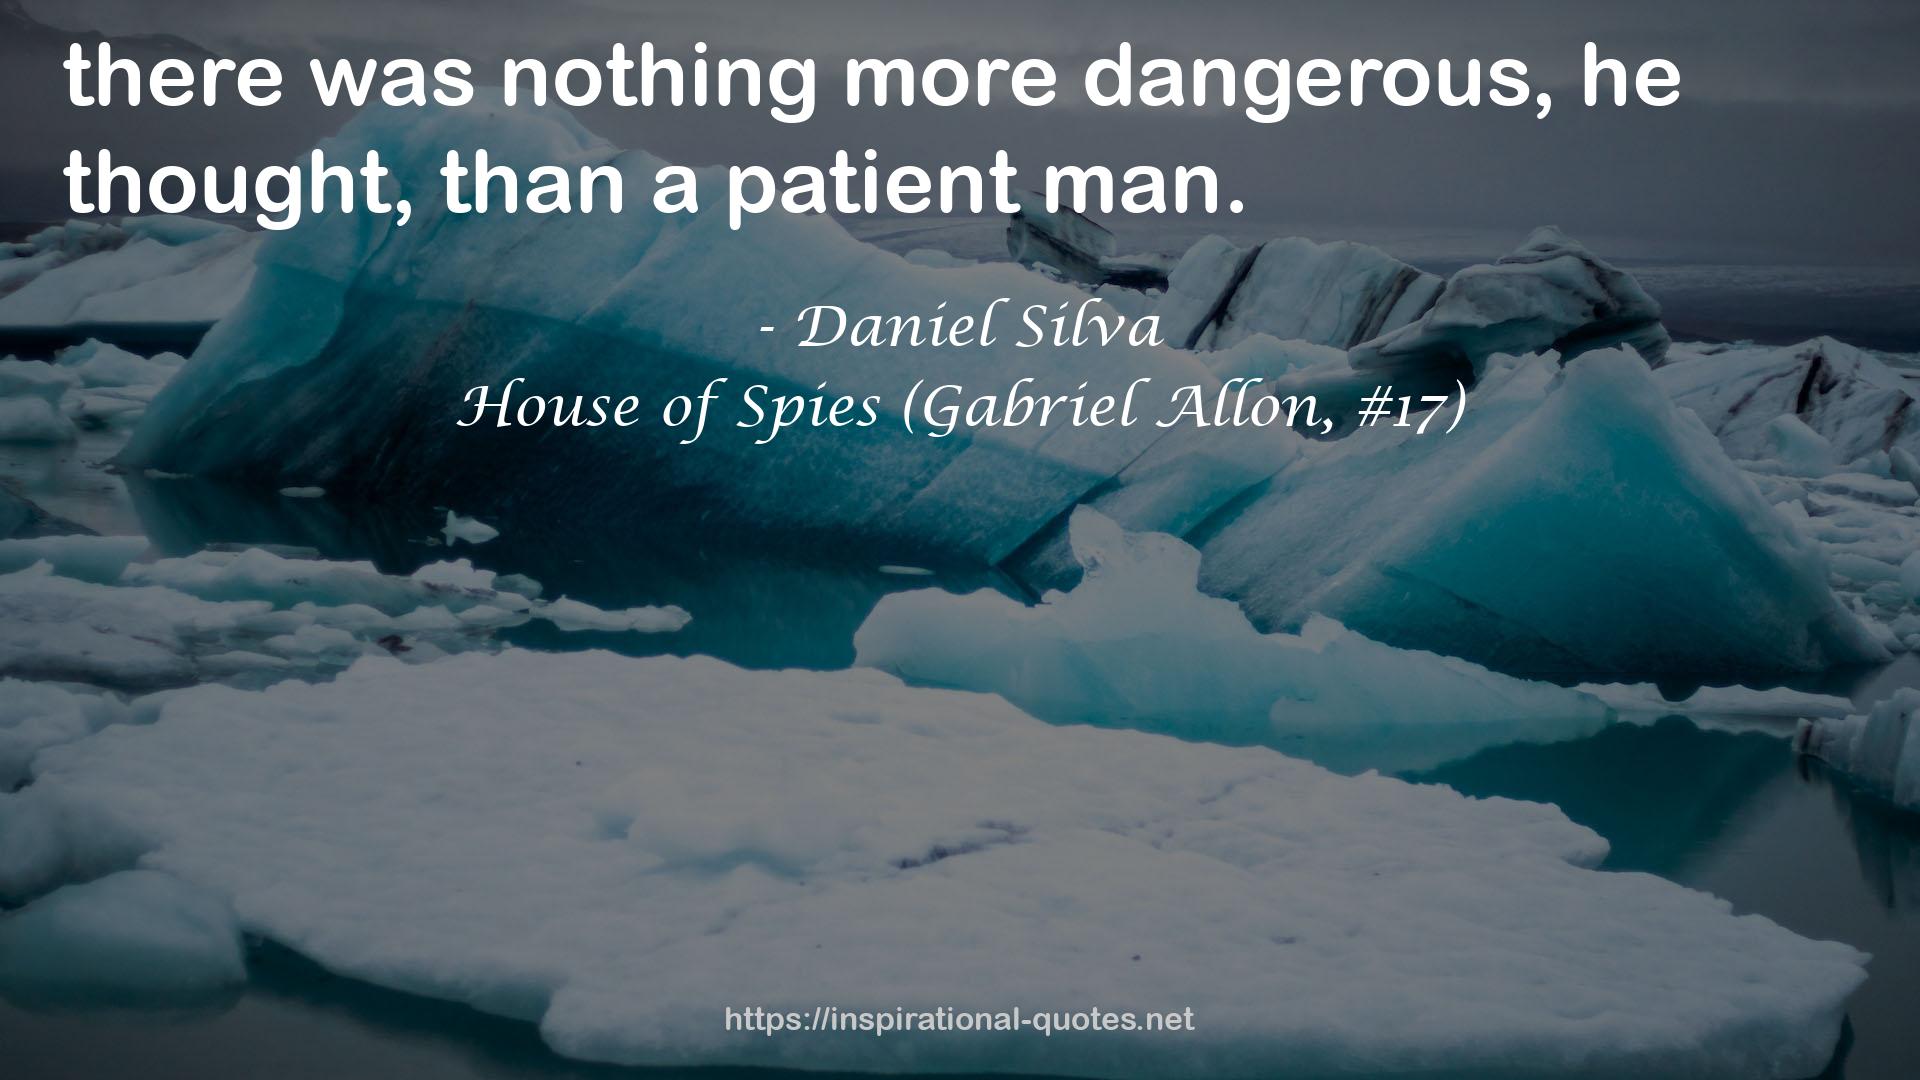 House of Spies (Gabriel Allon, #17) QUOTES